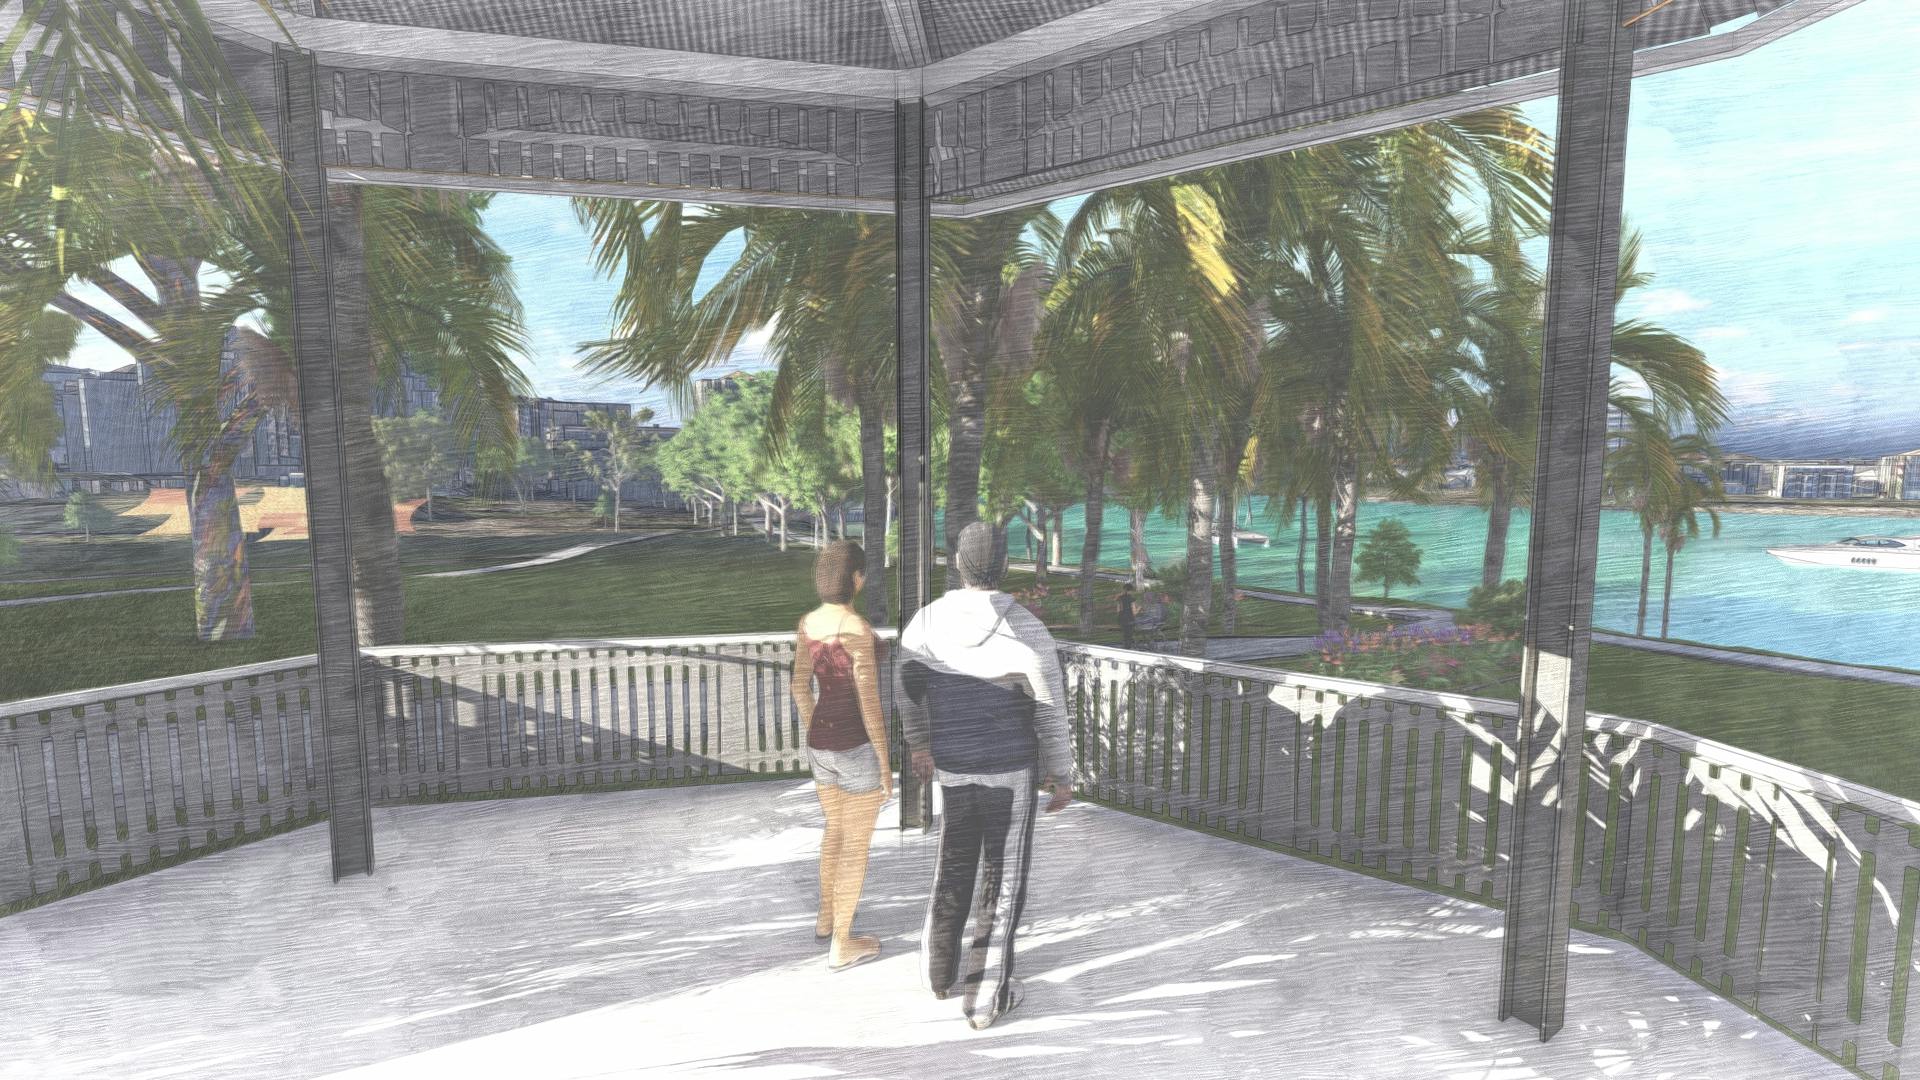 Artist's impression of the proposed bandstand